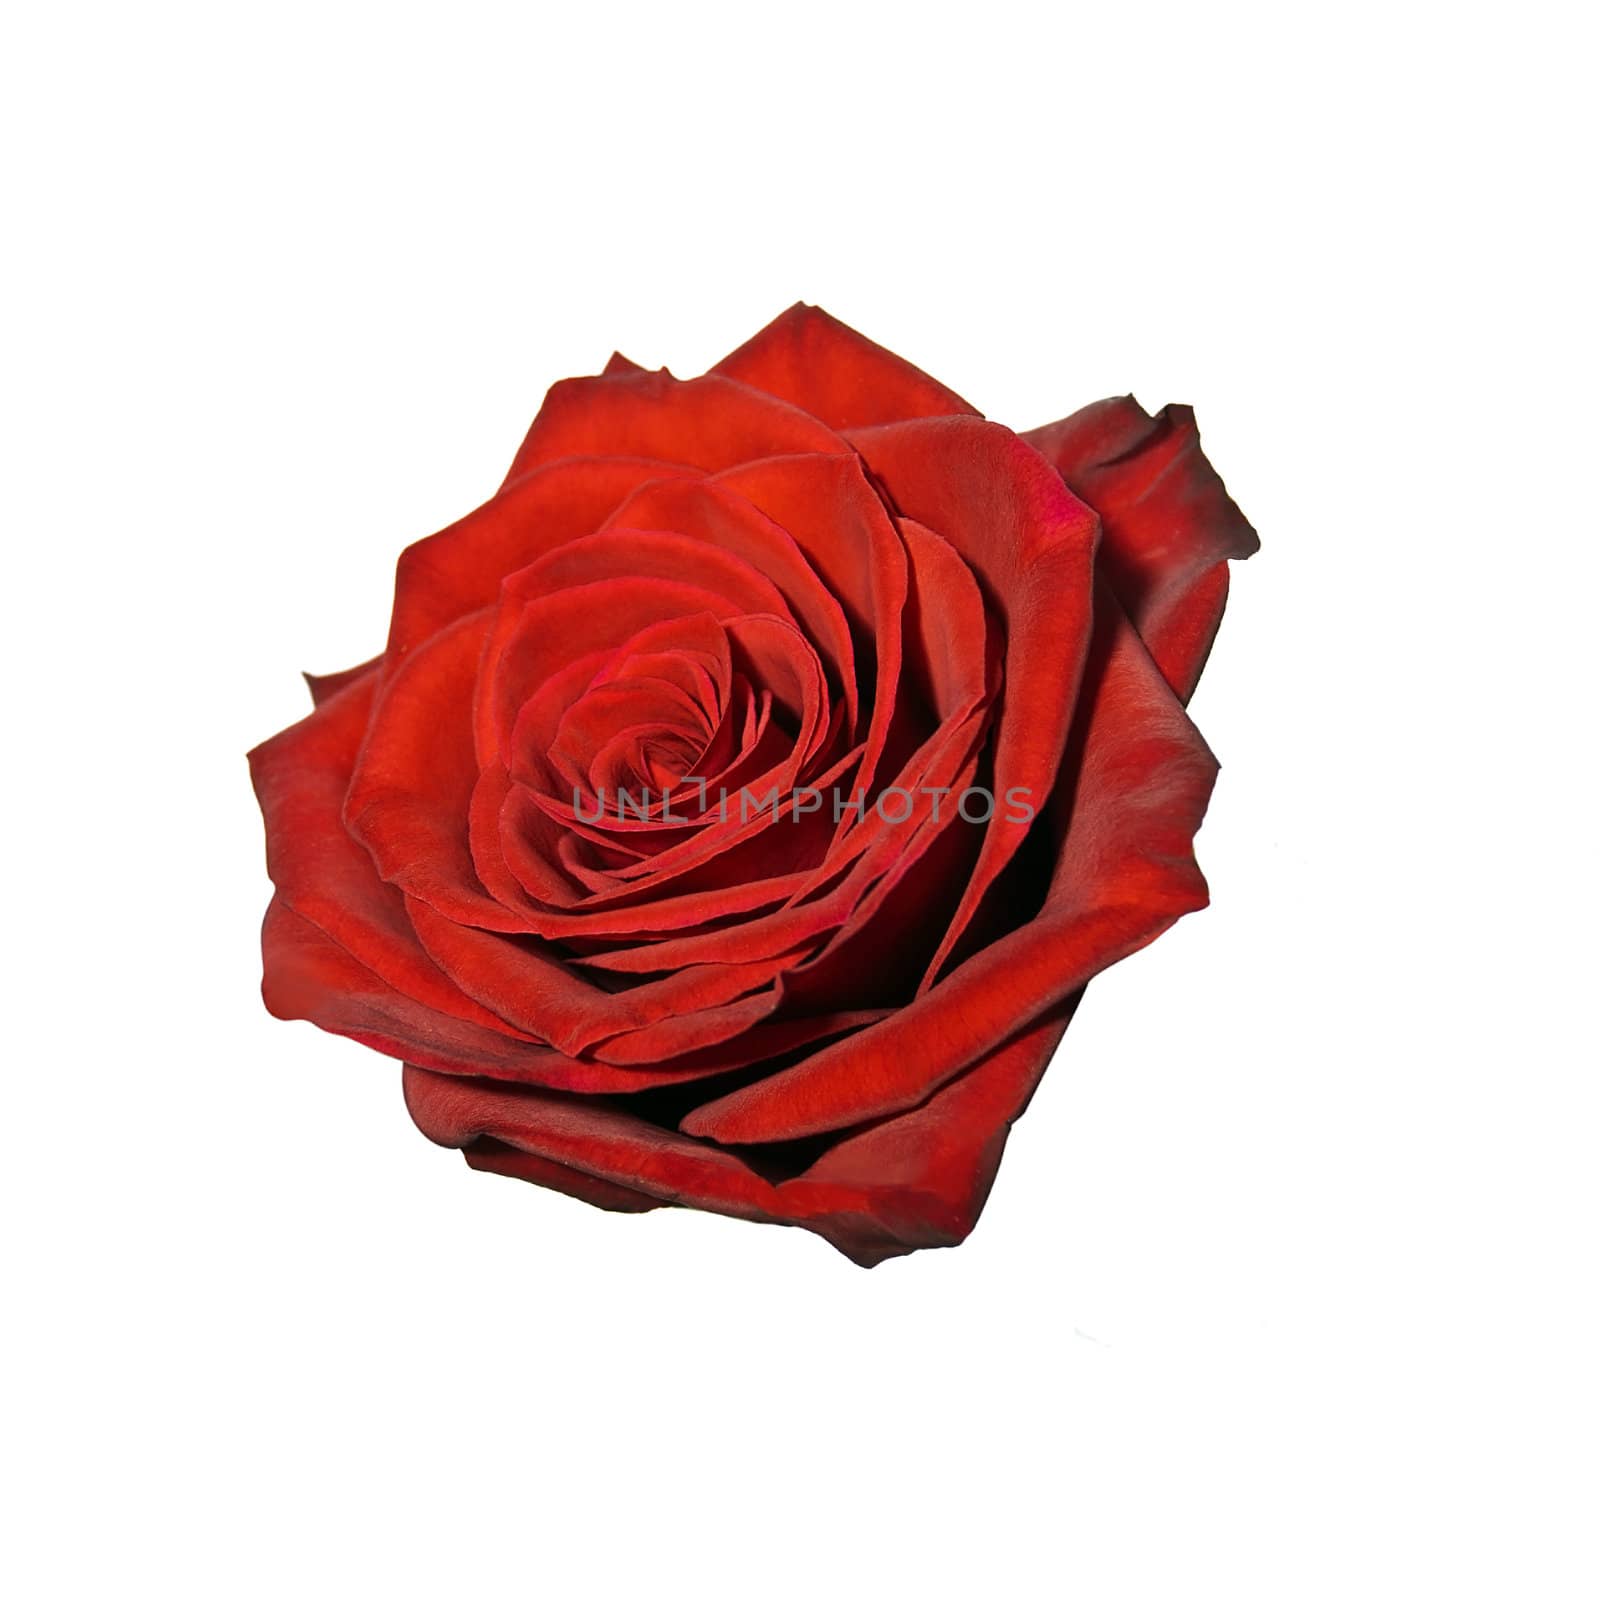 Beautiful fresh red rose bud isolated on a white background.